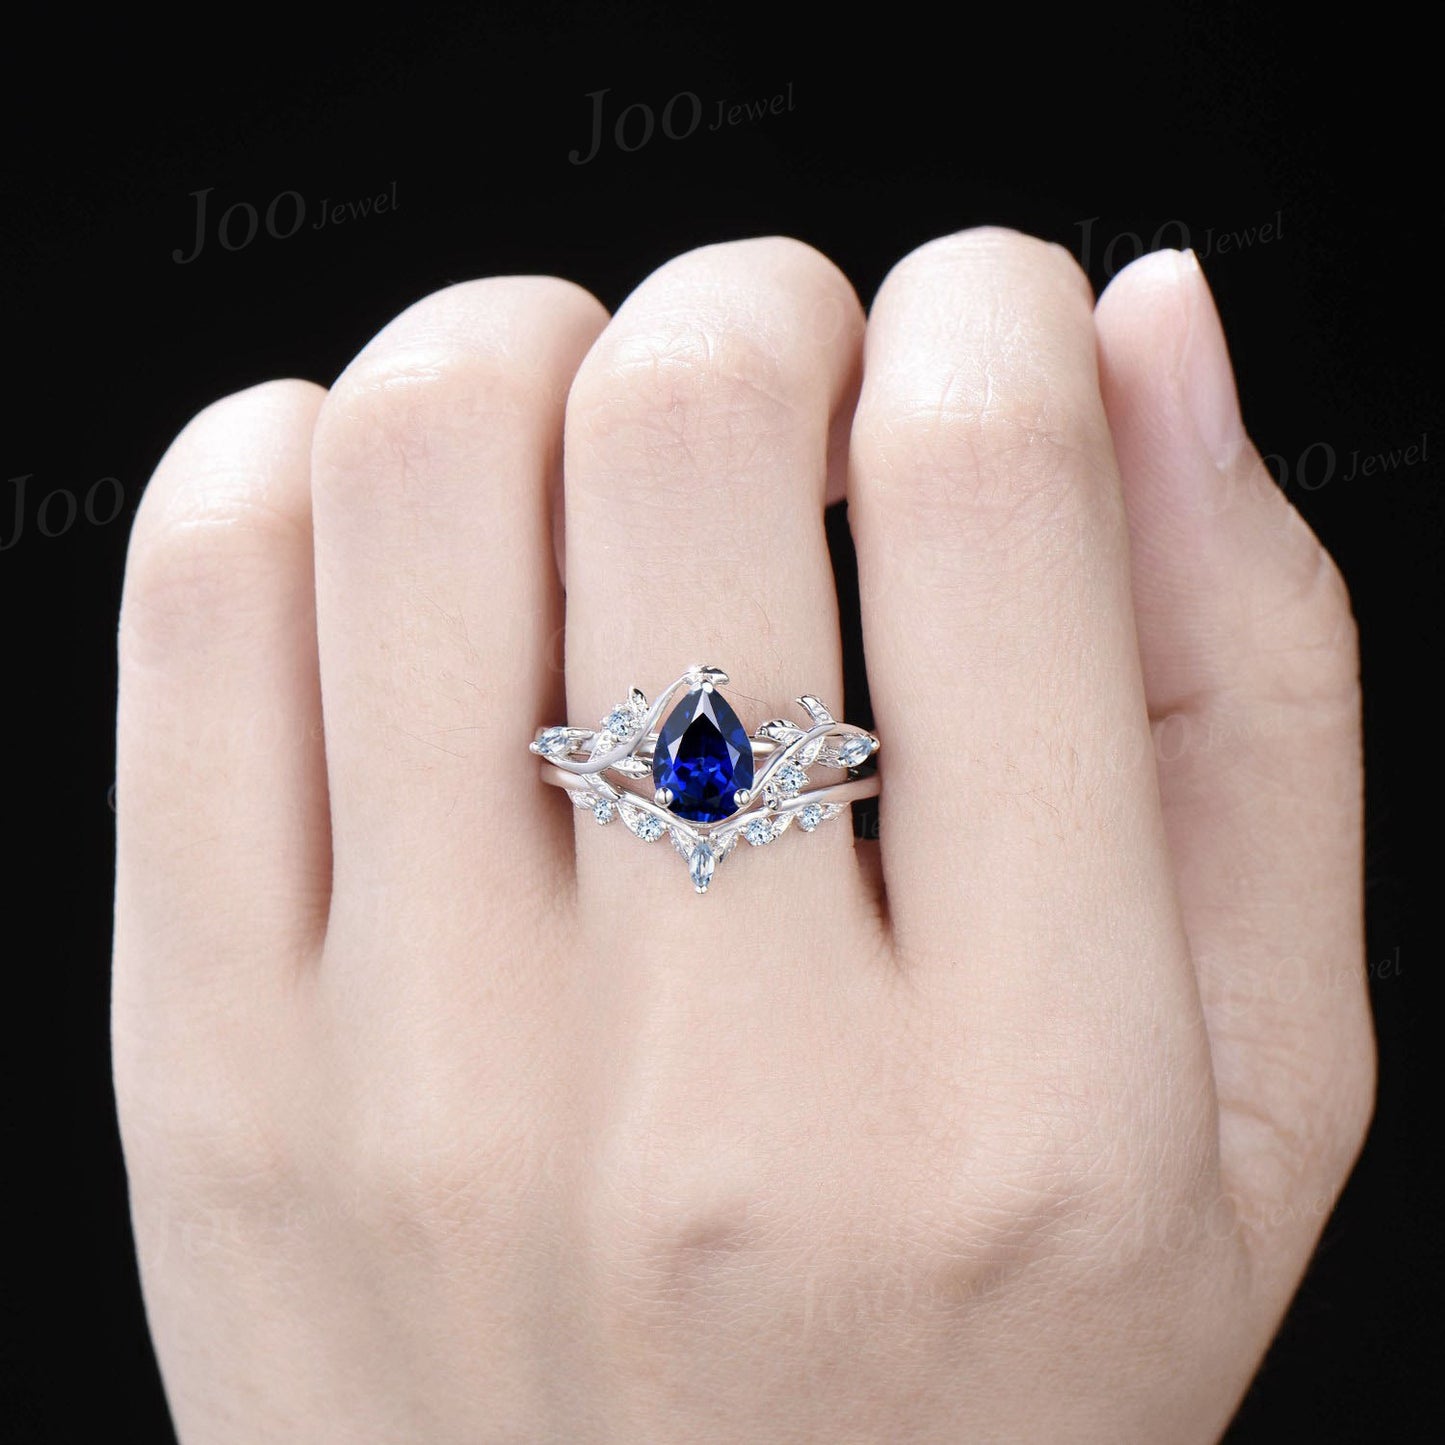 1.25ct Pear Cut Blue Sapphire Engagement Ring Set Leaf Branch Nature Inspired Real Aquamarine Wedding Ring for Women September Jewelry Gifts